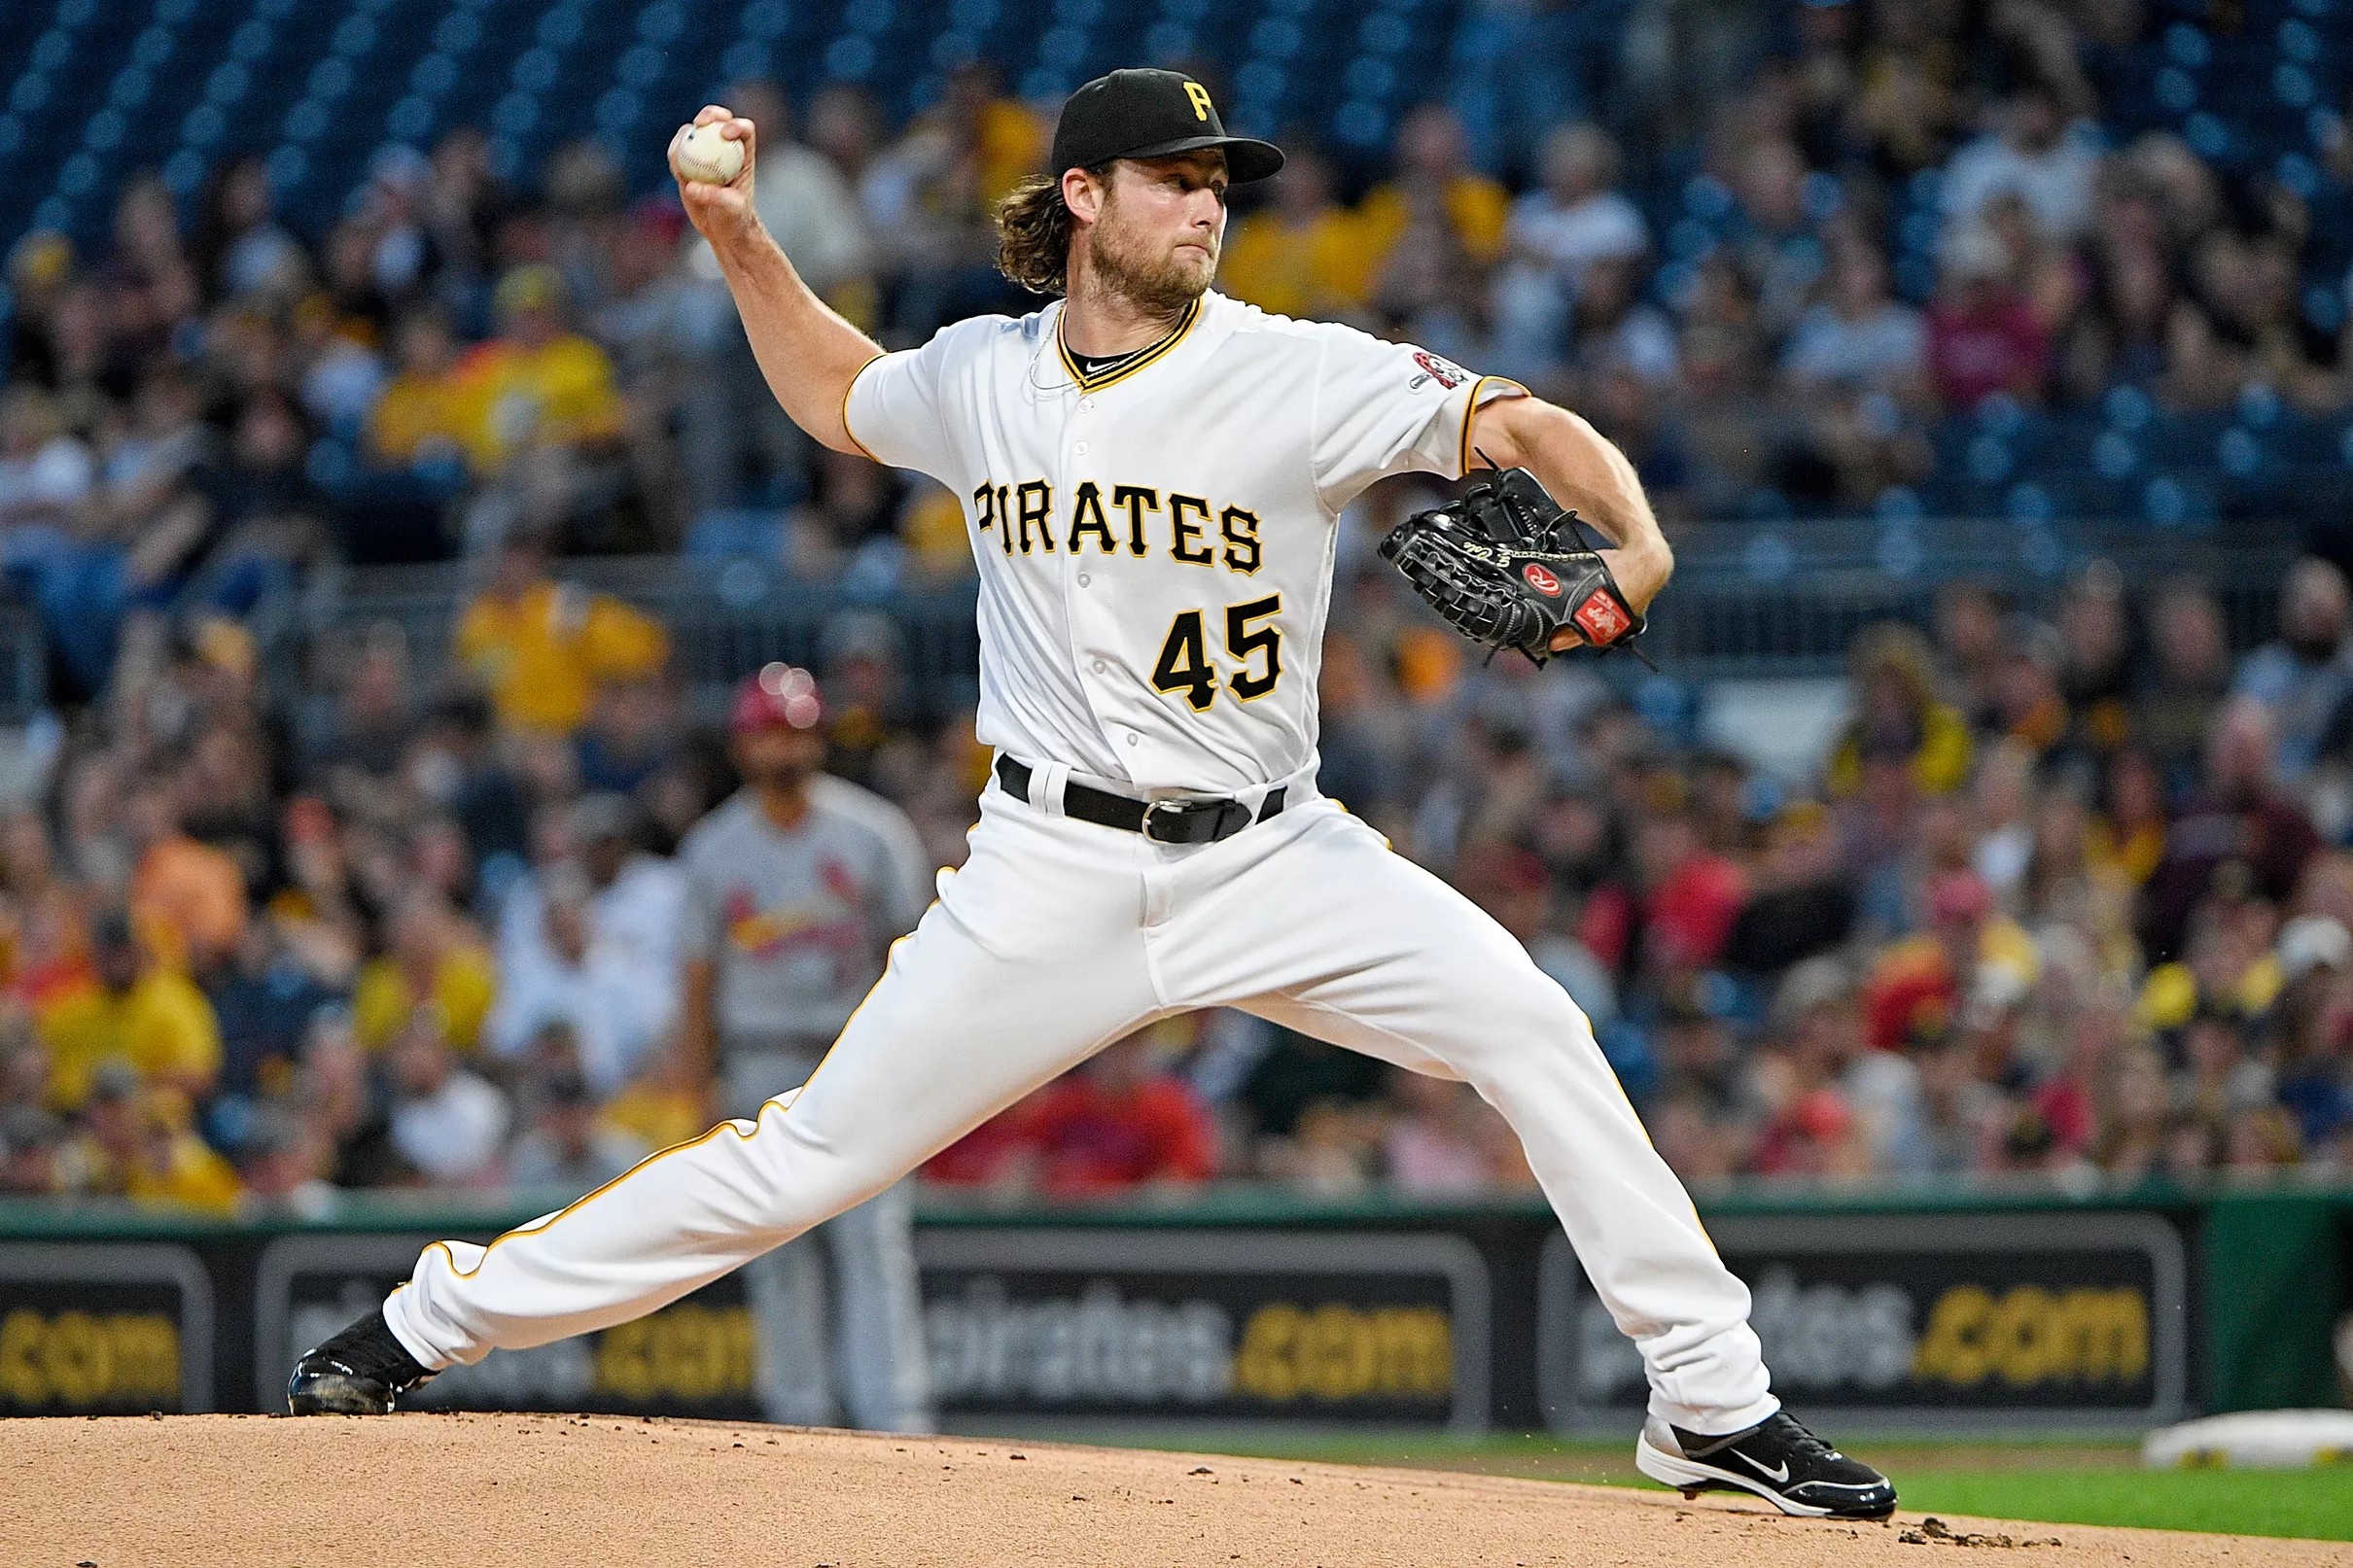 Pirates’ projected arbitration salaries